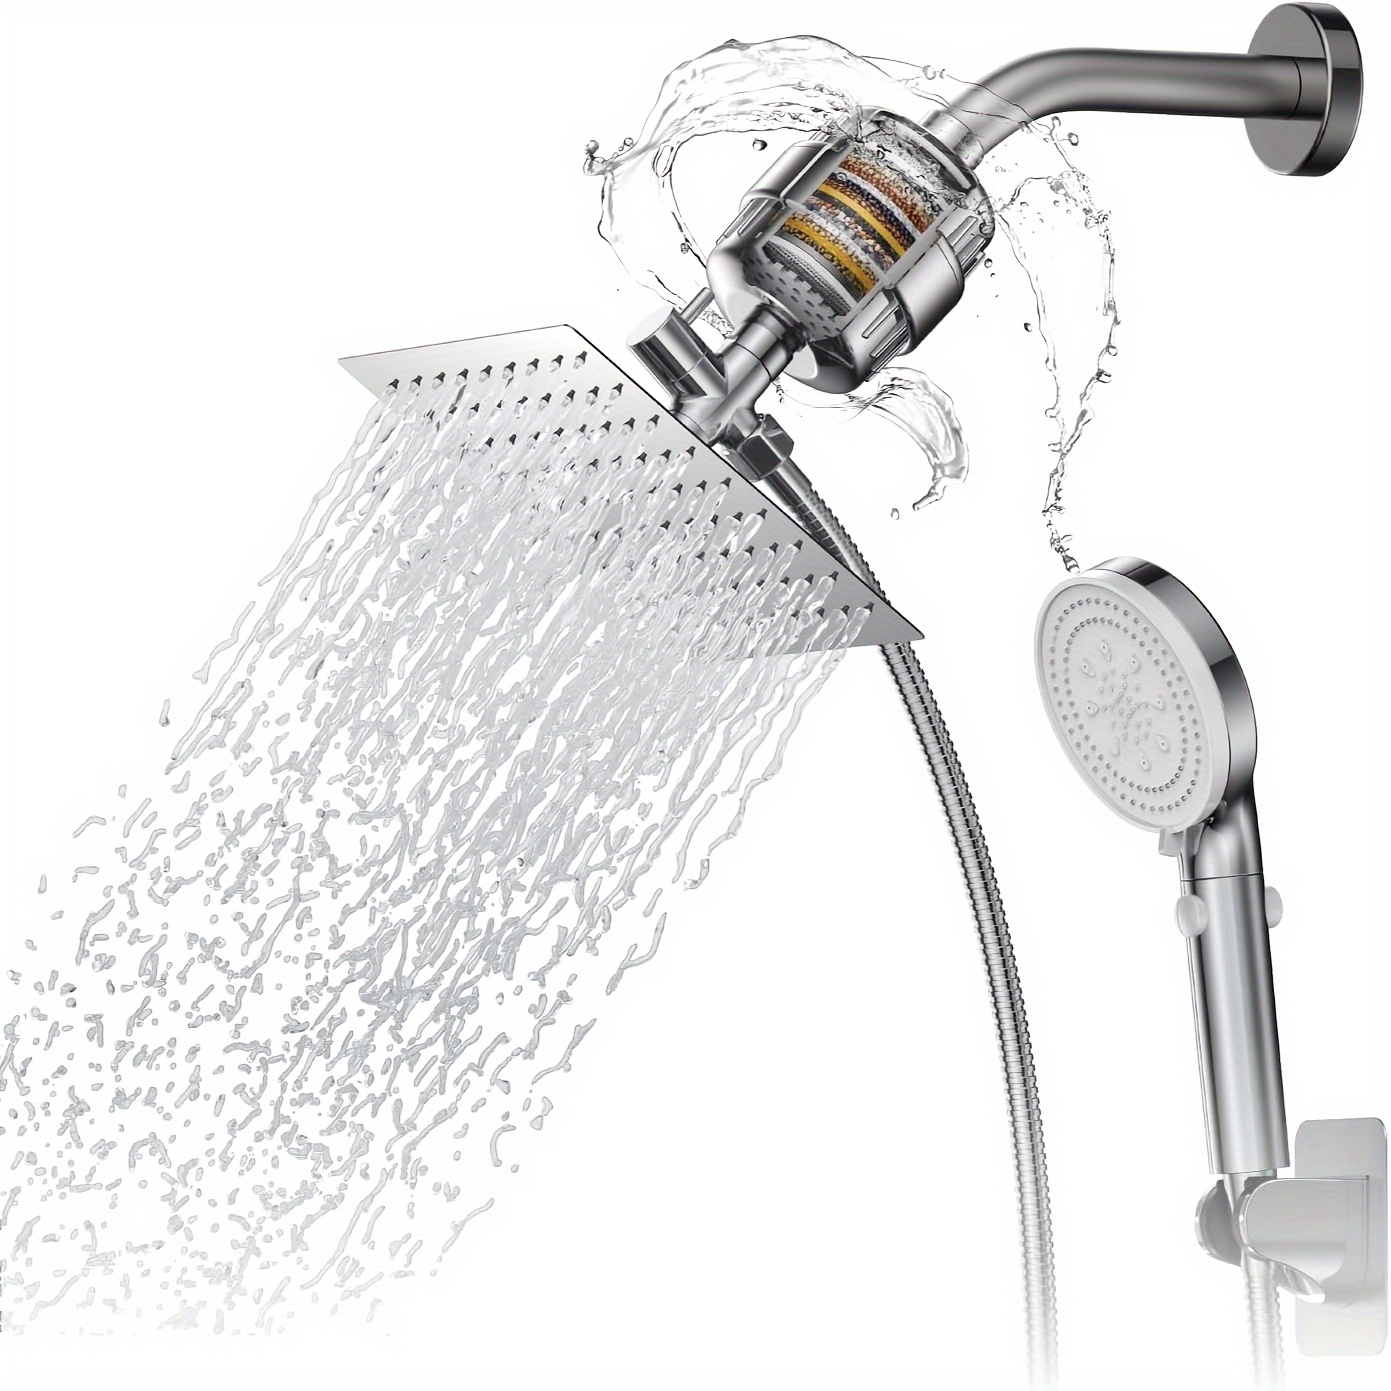 

Filtered Shower Head 20 Stage Shower Filter 8" High Pressure Square Rain Shower Head With 5 Spray Mode 60" Stainless Steel Hose Remove Chlorine Fluoride Reduces Dry Itchy Skin, Chrome